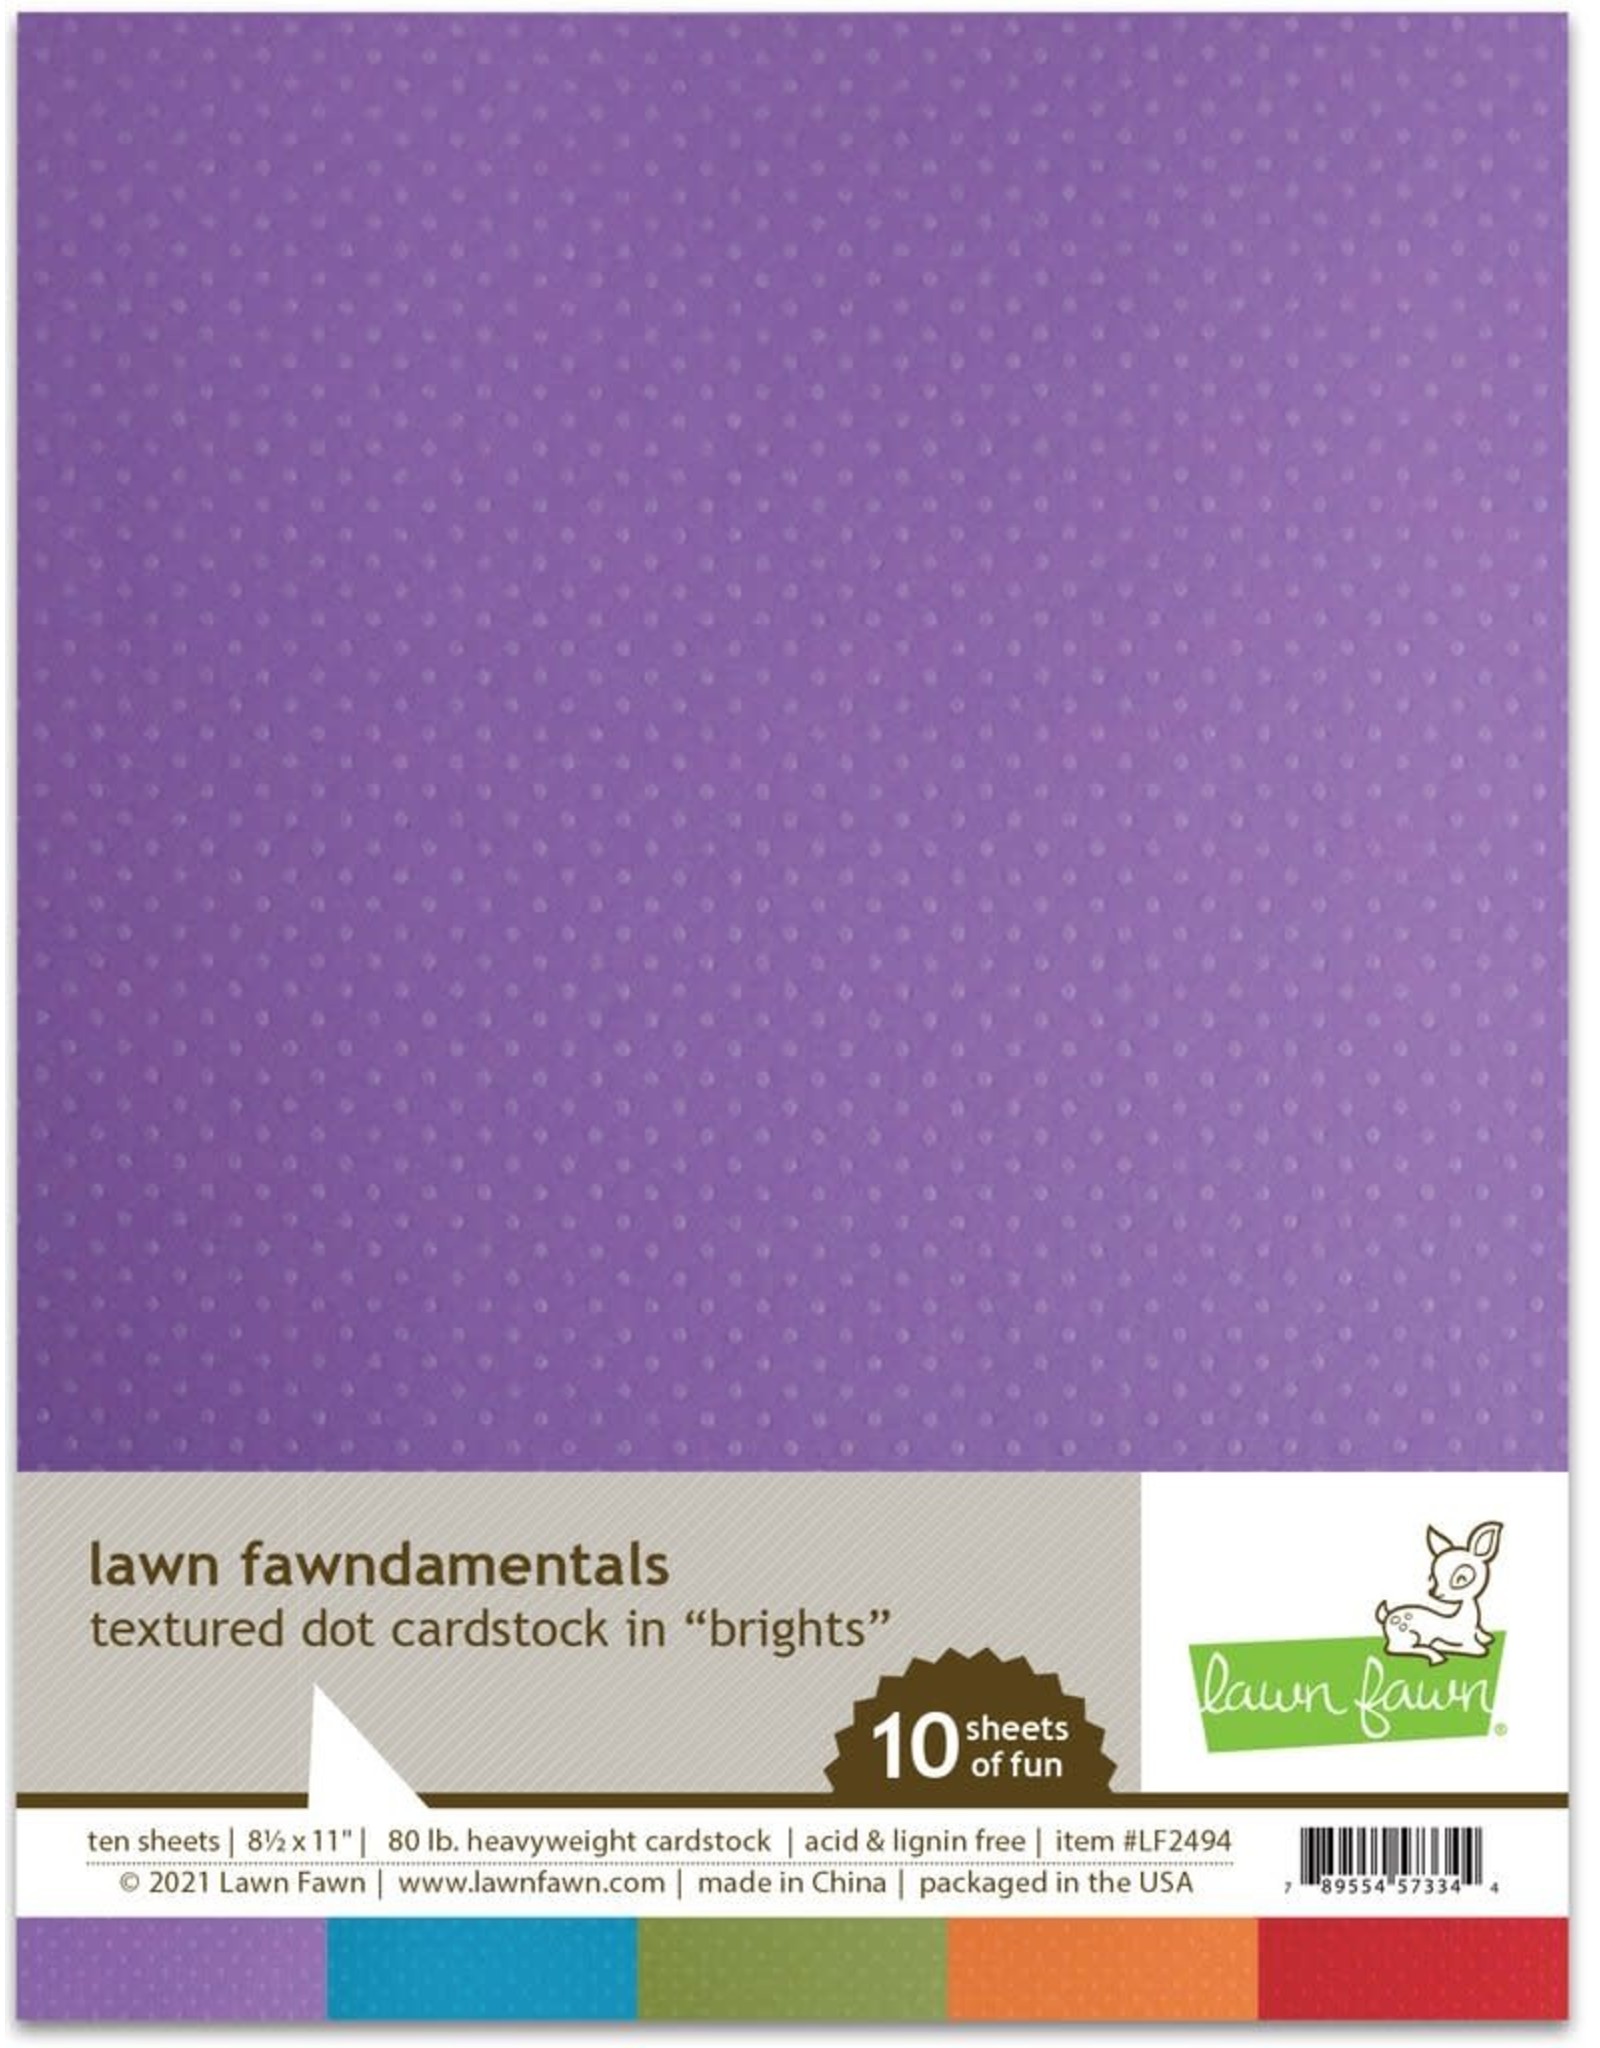 LAWN FAWN LAWN FAWN BRIGHTS TEXTURED DOT 8.5x11 CARDSTOCK 10 SHEETS